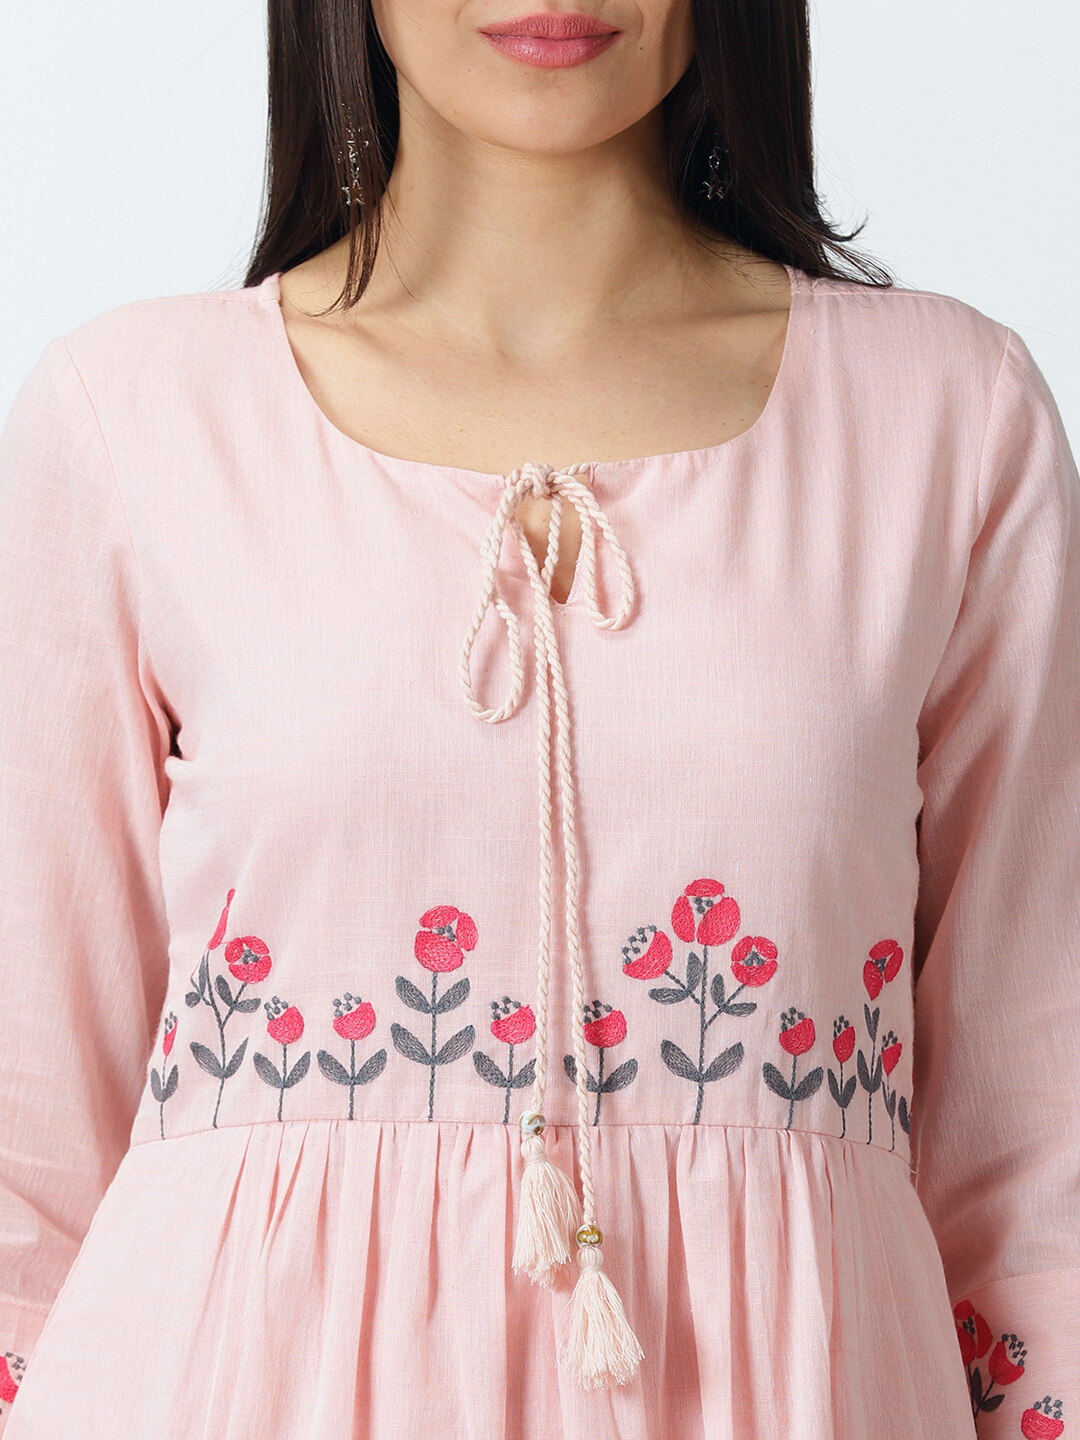 Pastel Pink Empire Midi Dress with Embroidered Details